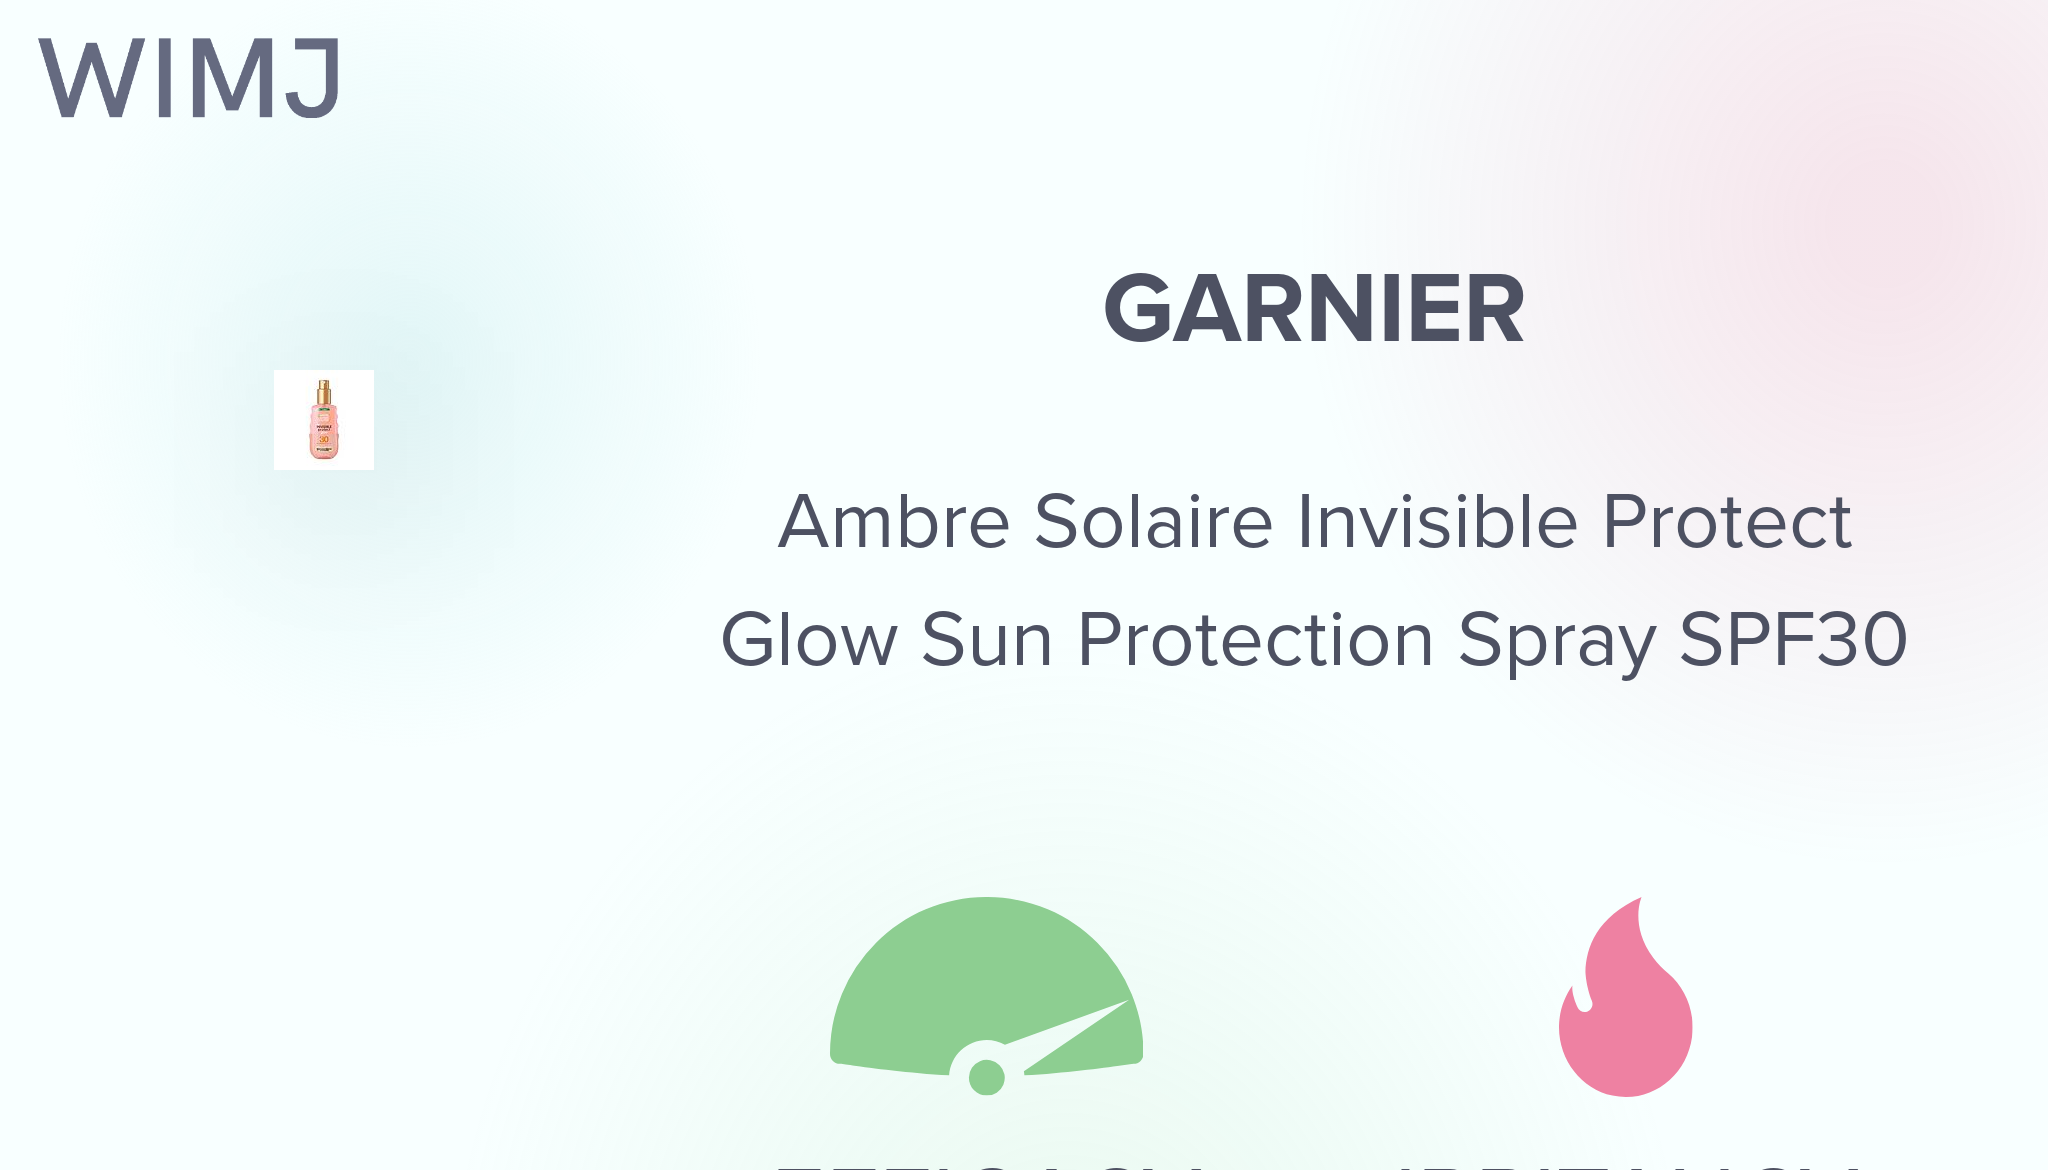 SPF30 Solaire Garnier Review: - - Protect Invisible WIMJ Ambre Spray Glow Protection Sun